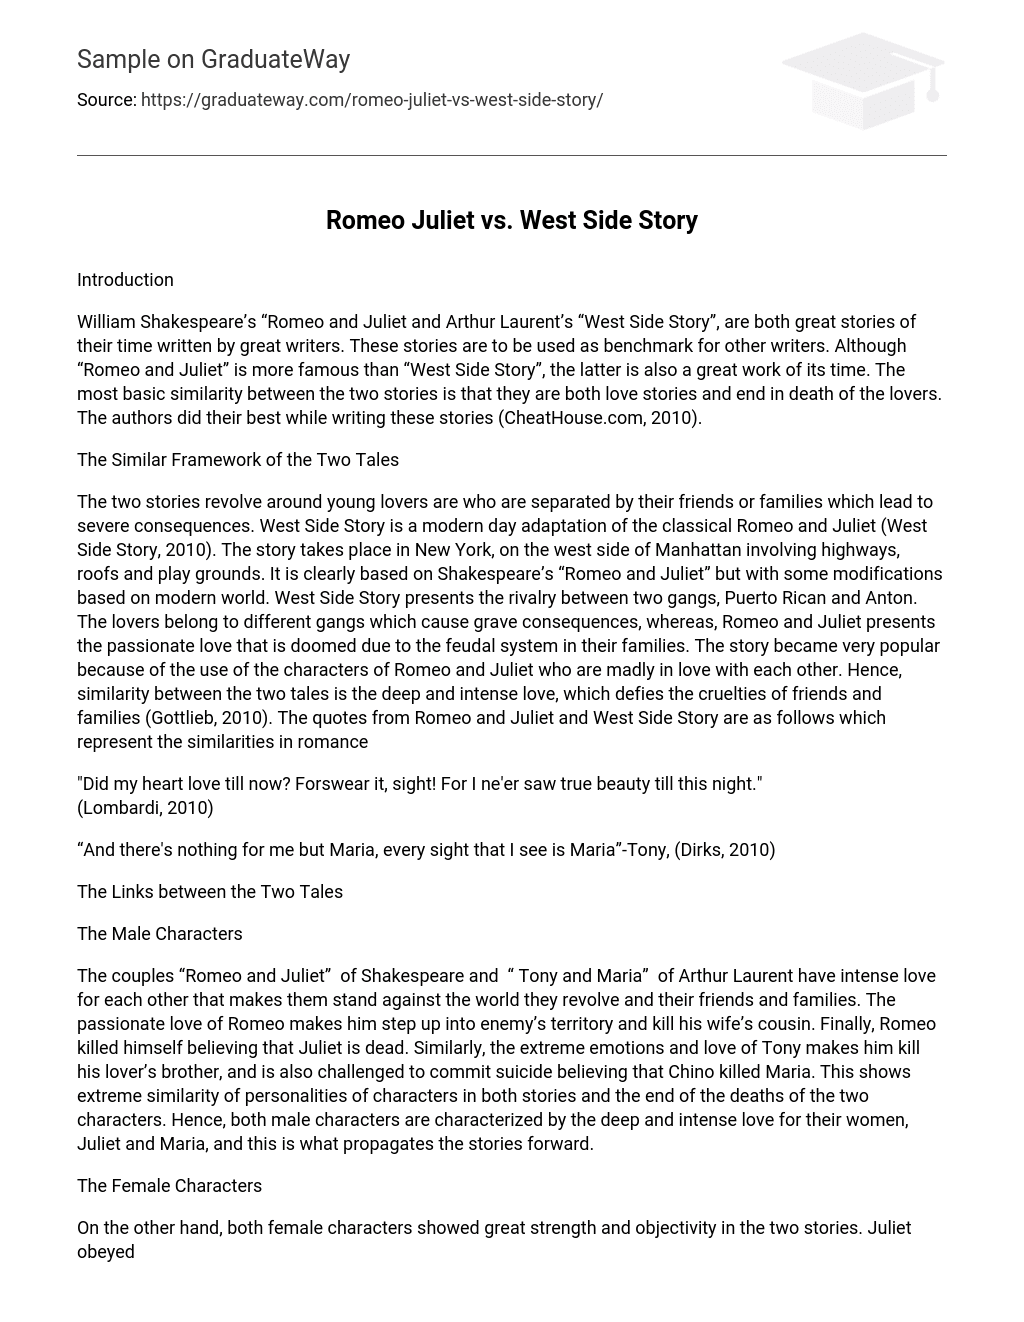 compare and contrast essay romeo and juliet to west side story